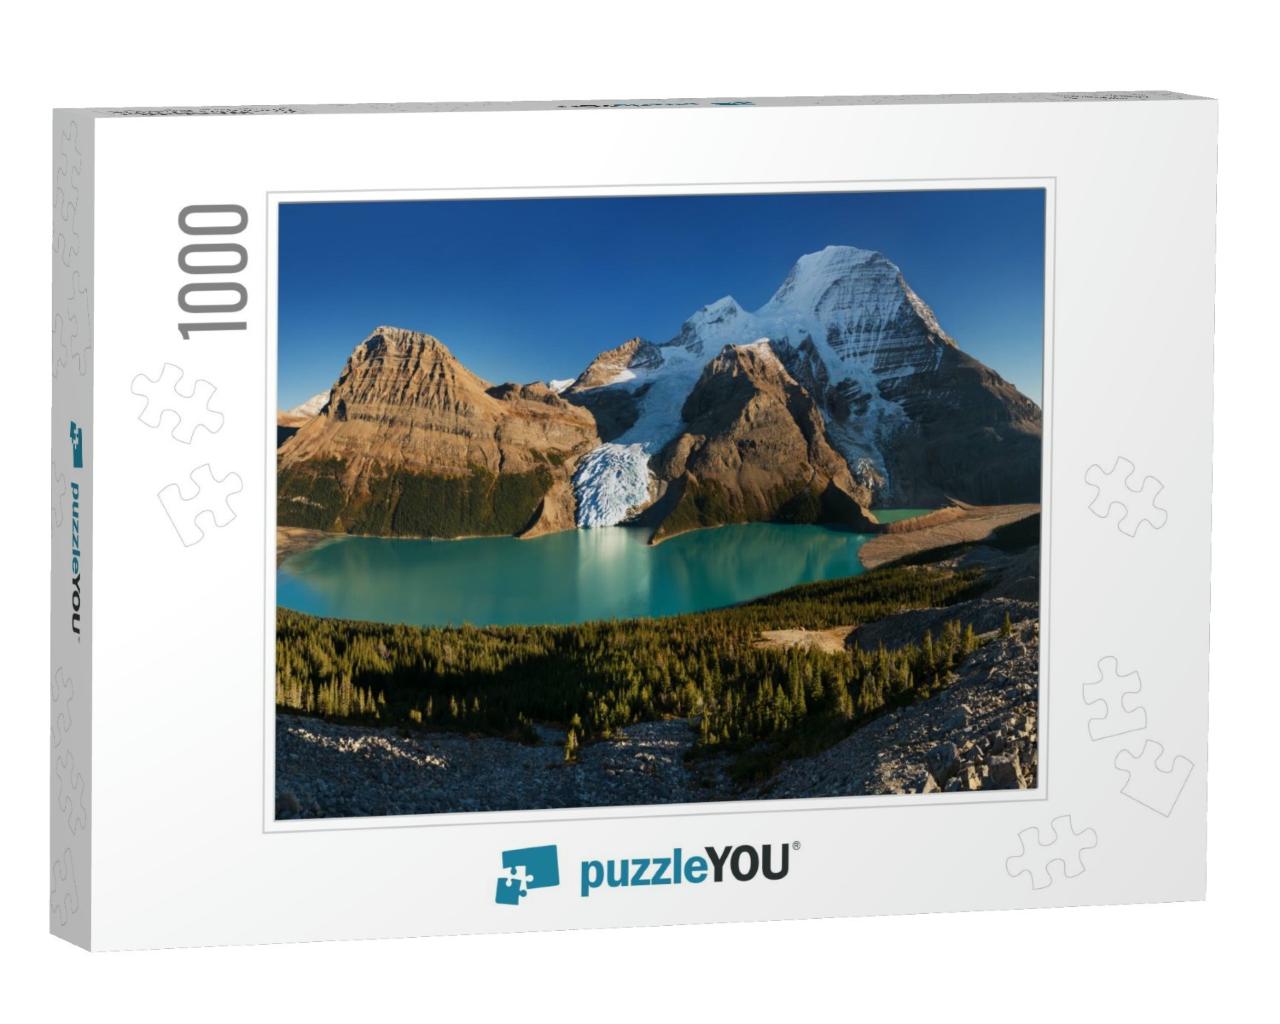 Mount Robson is the Most Prominent Mountain in North Amer... Jigsaw Puzzle with 1000 pieces